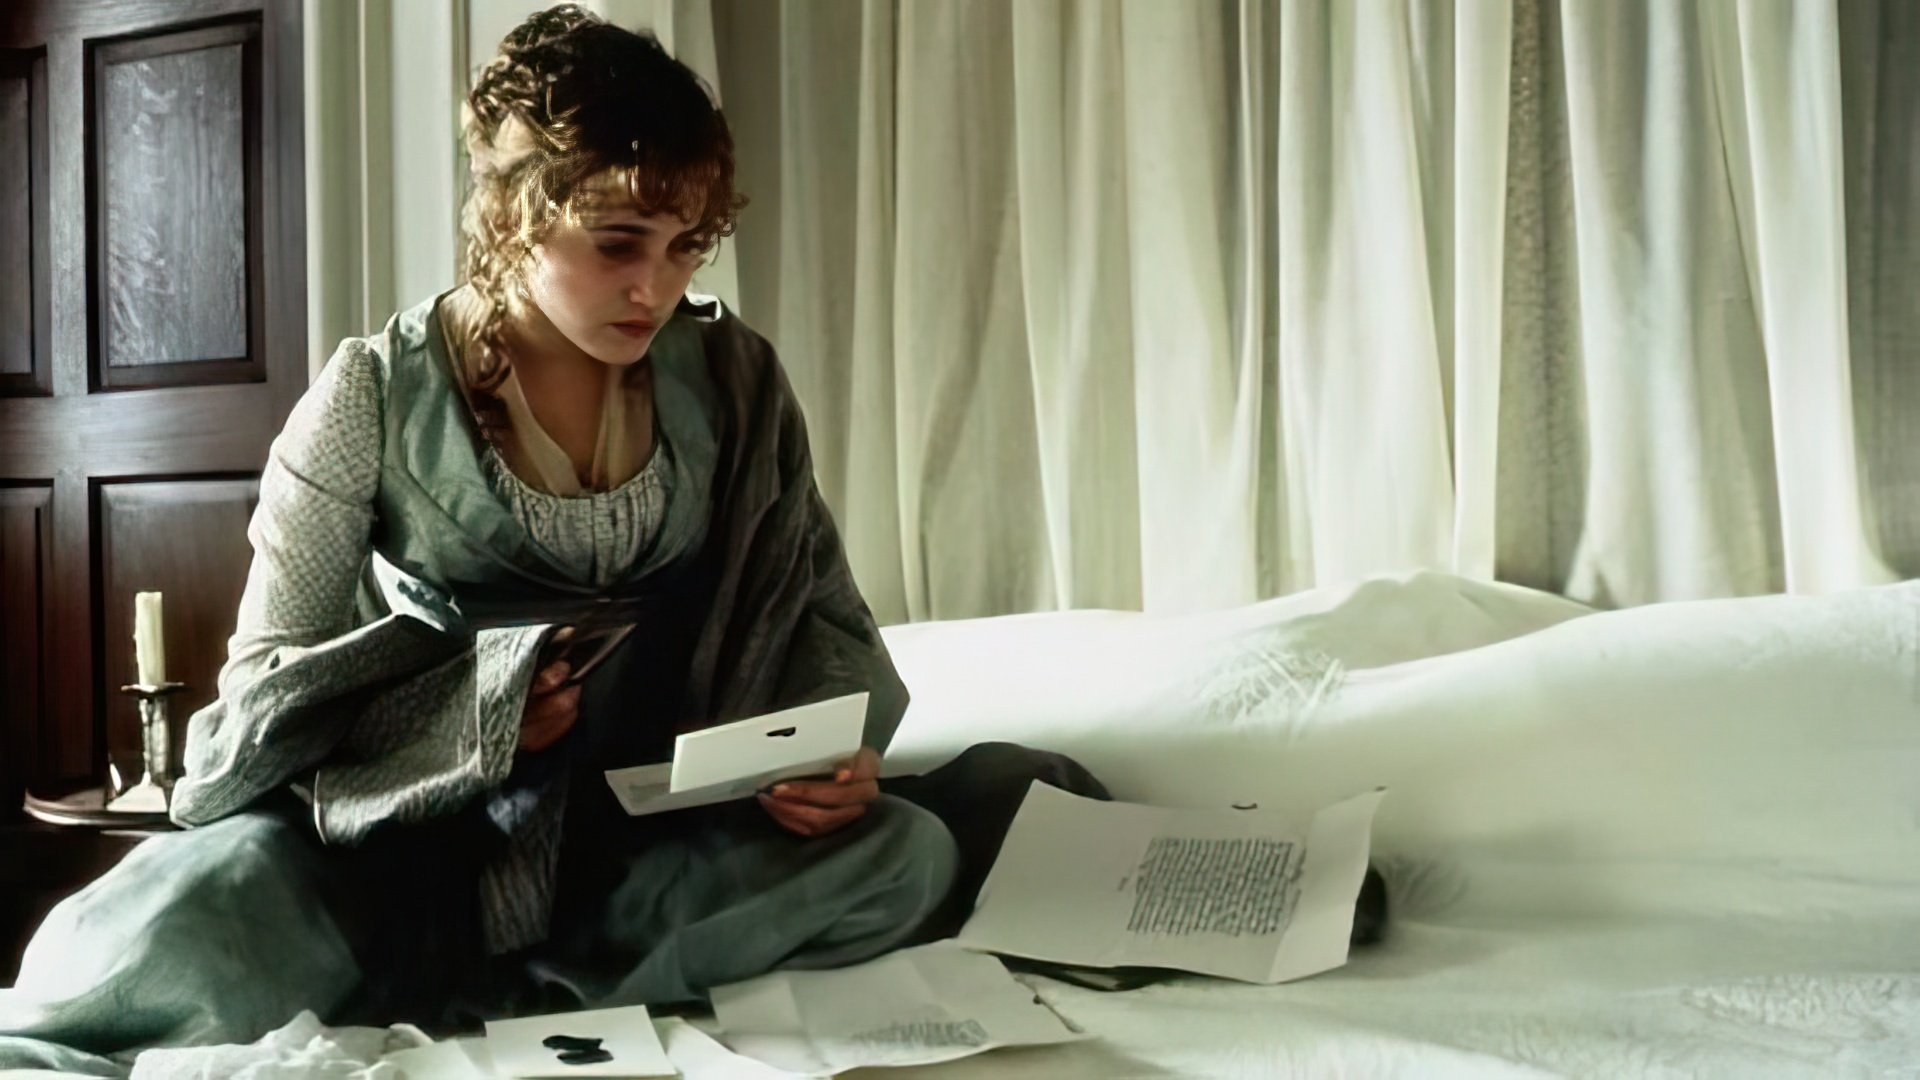 Kate Winslet in the movie 'Sense and Sensibility'